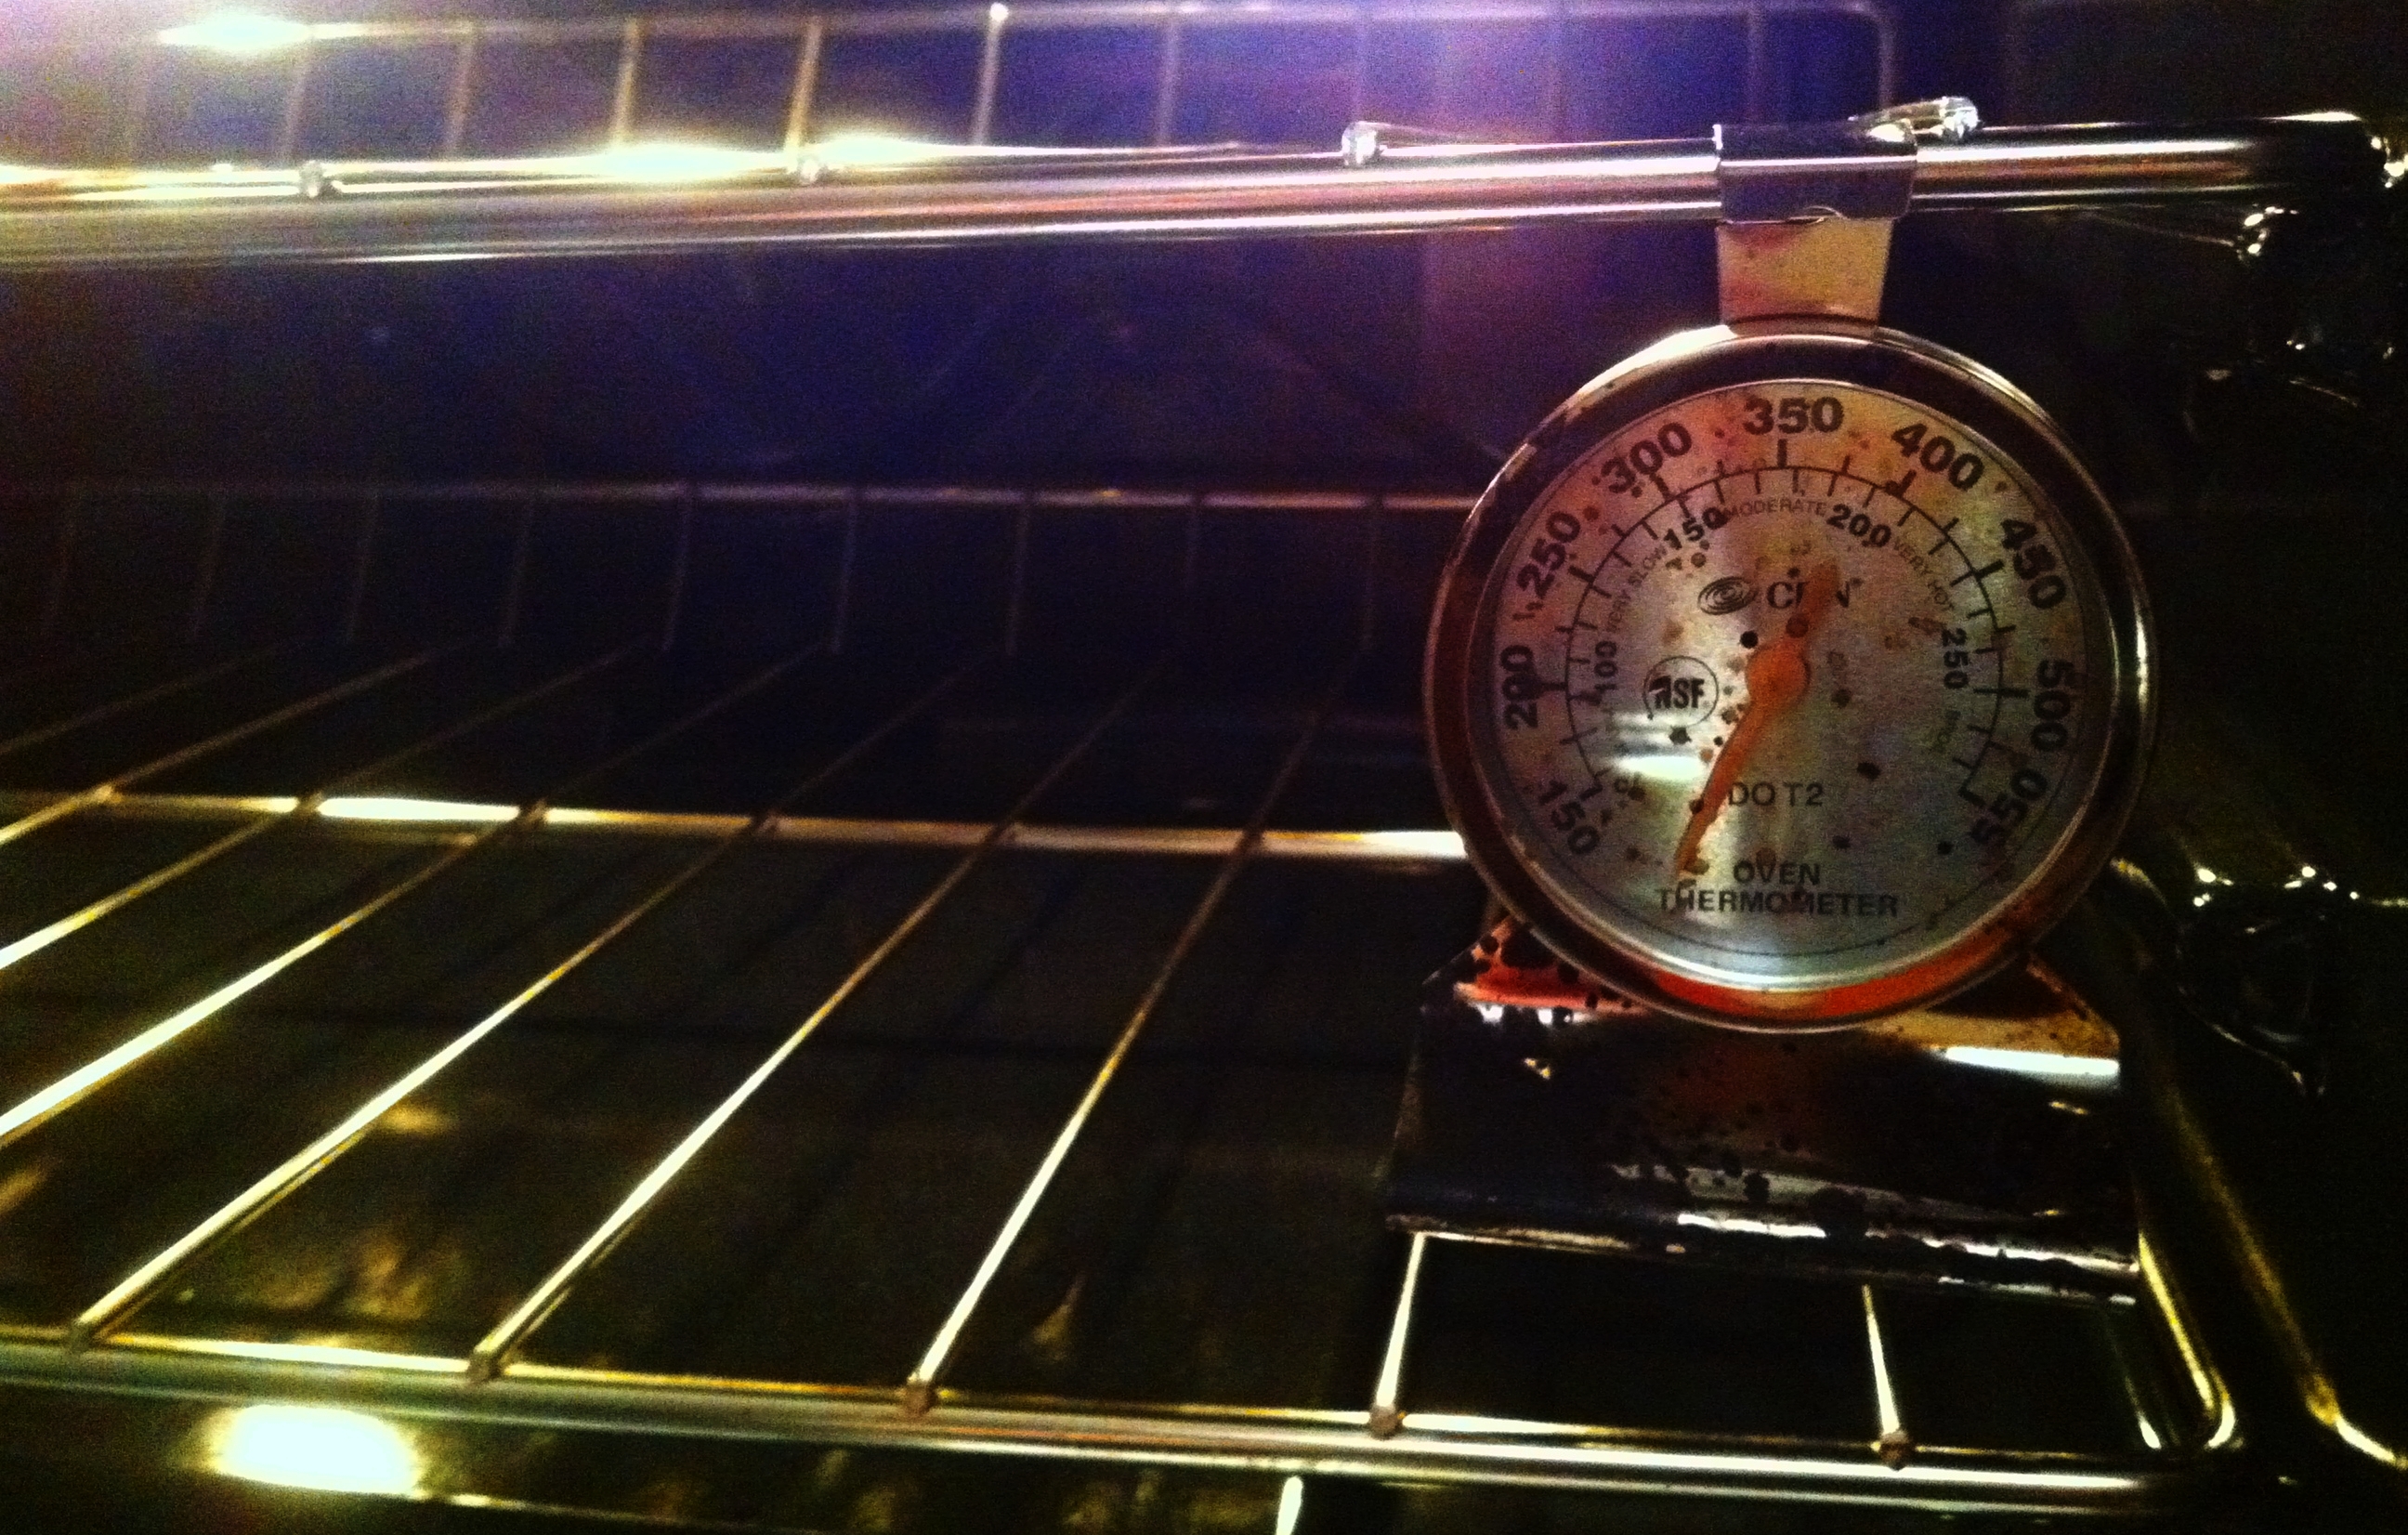 One of my oven thermometers; there's another on the other side and one built into my oven, too